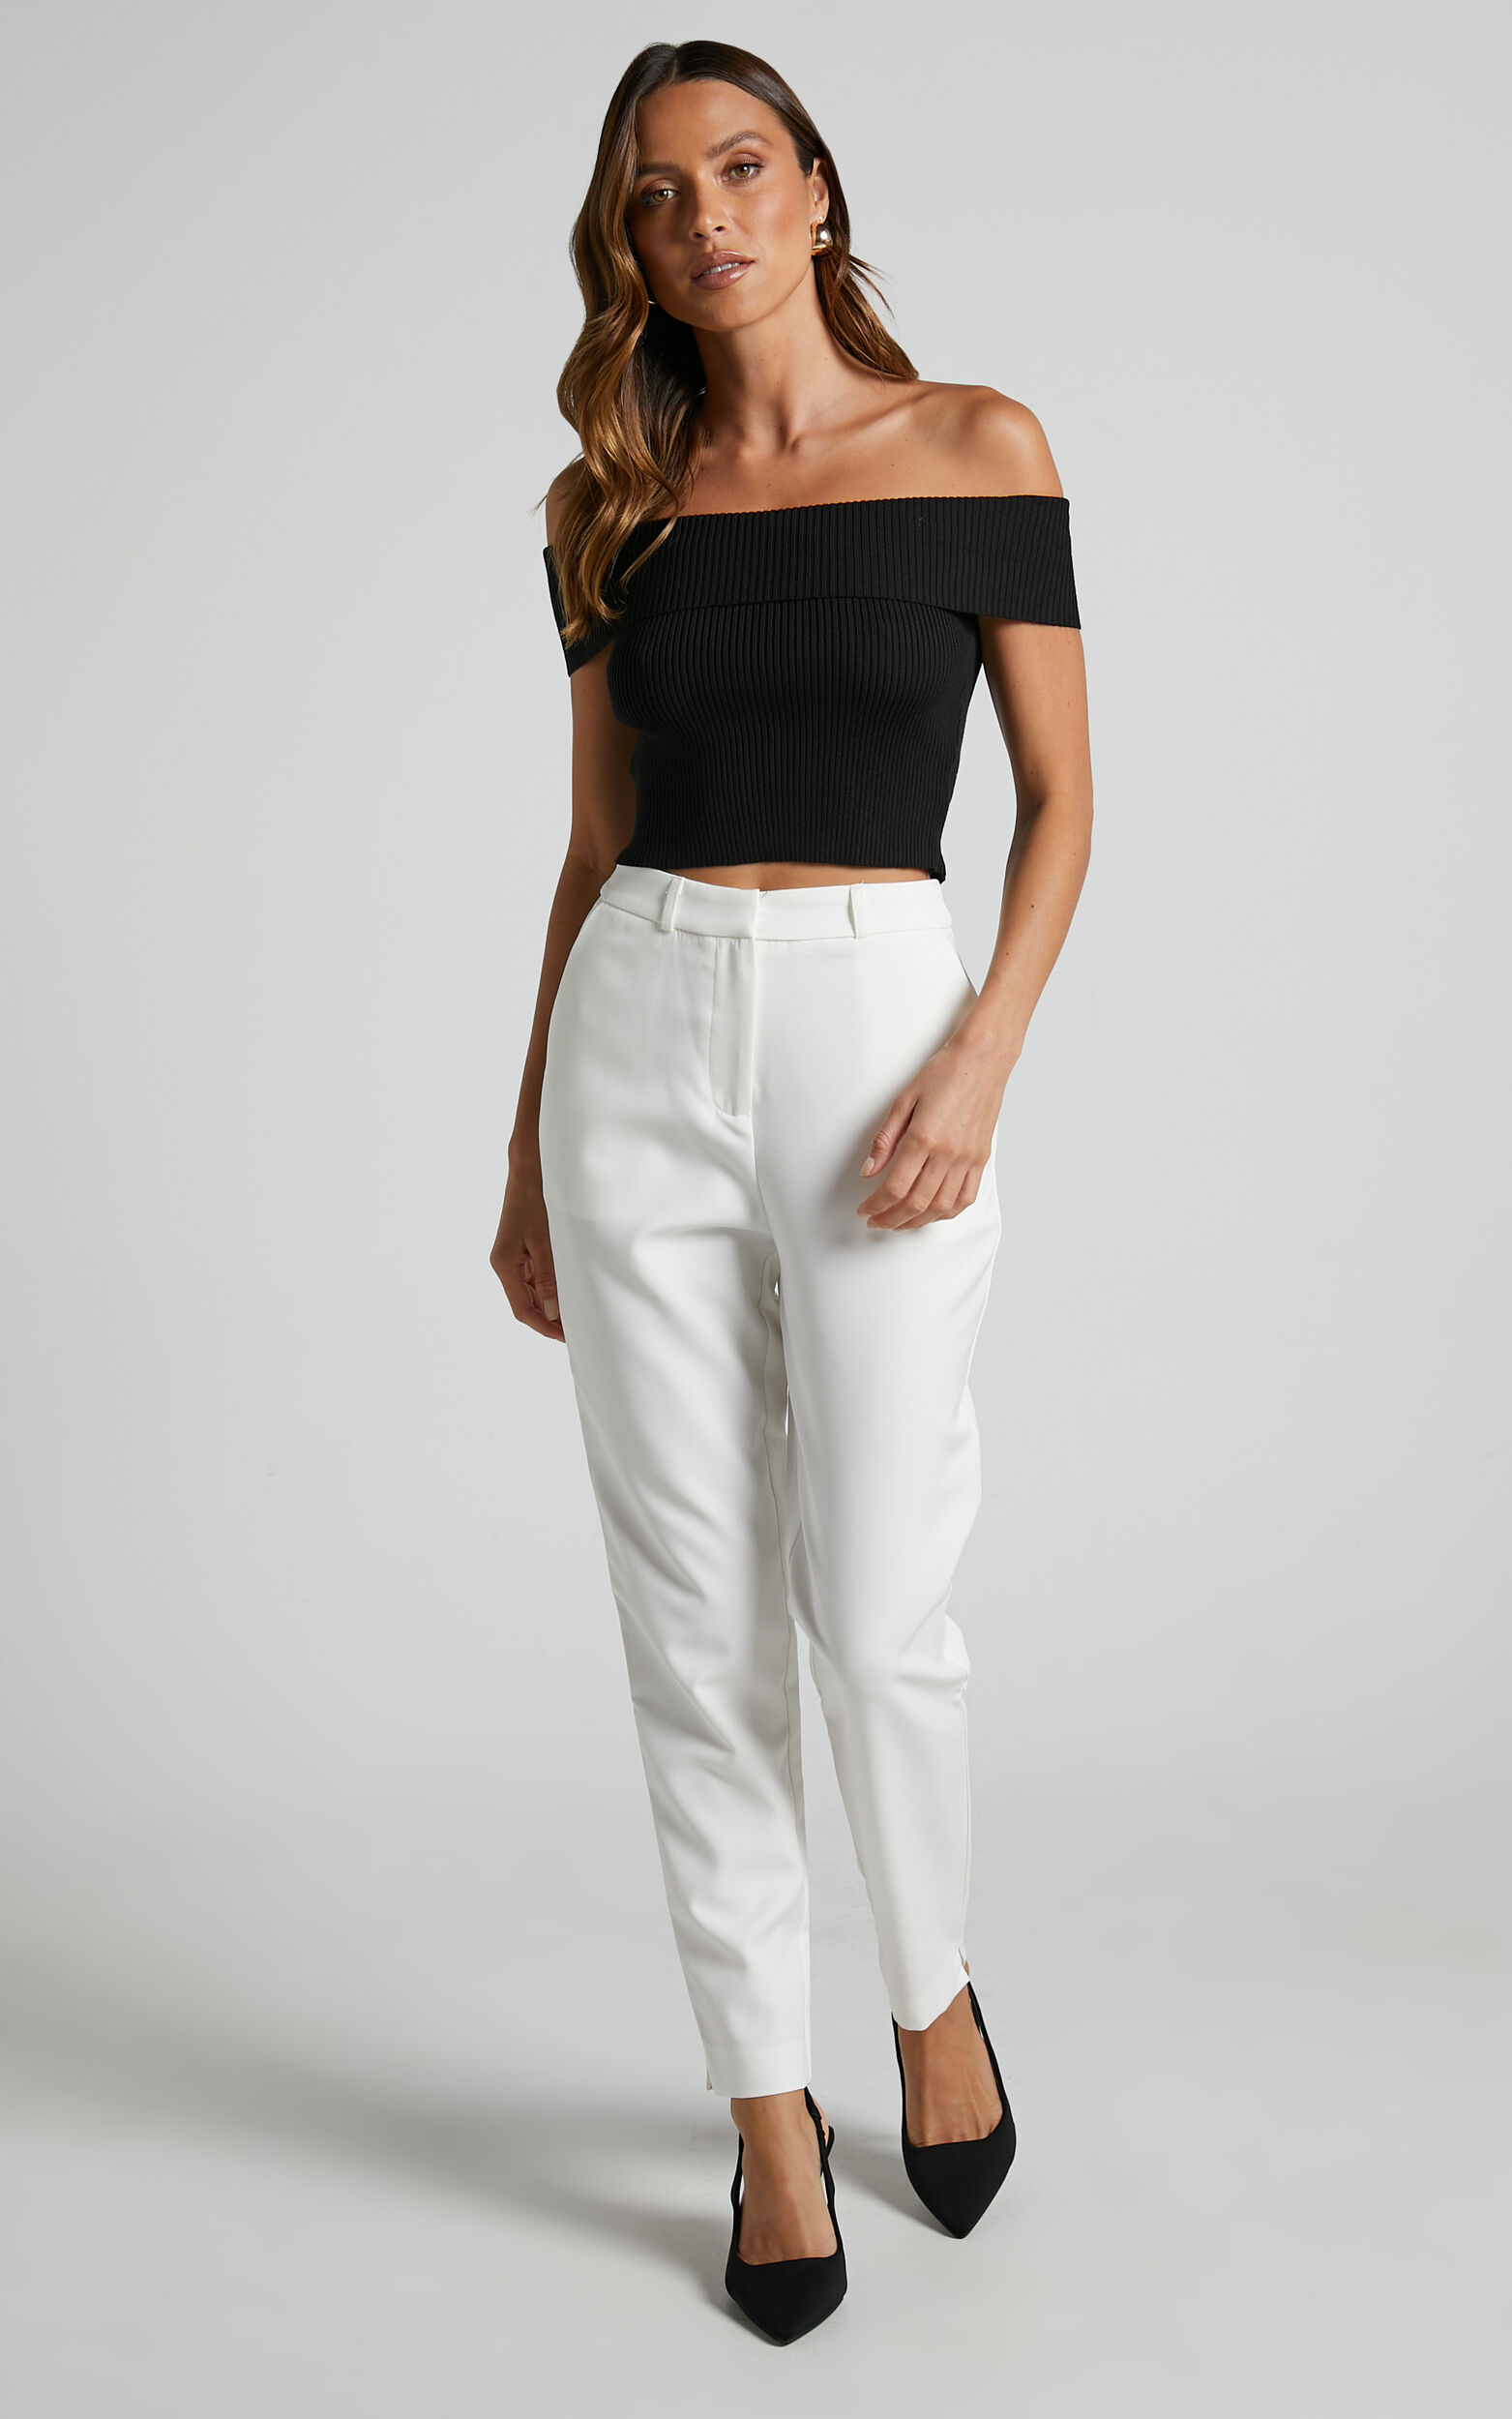 Hermie Pants - High Waisted Cropped Tailored Pants in White - 04, WHT2